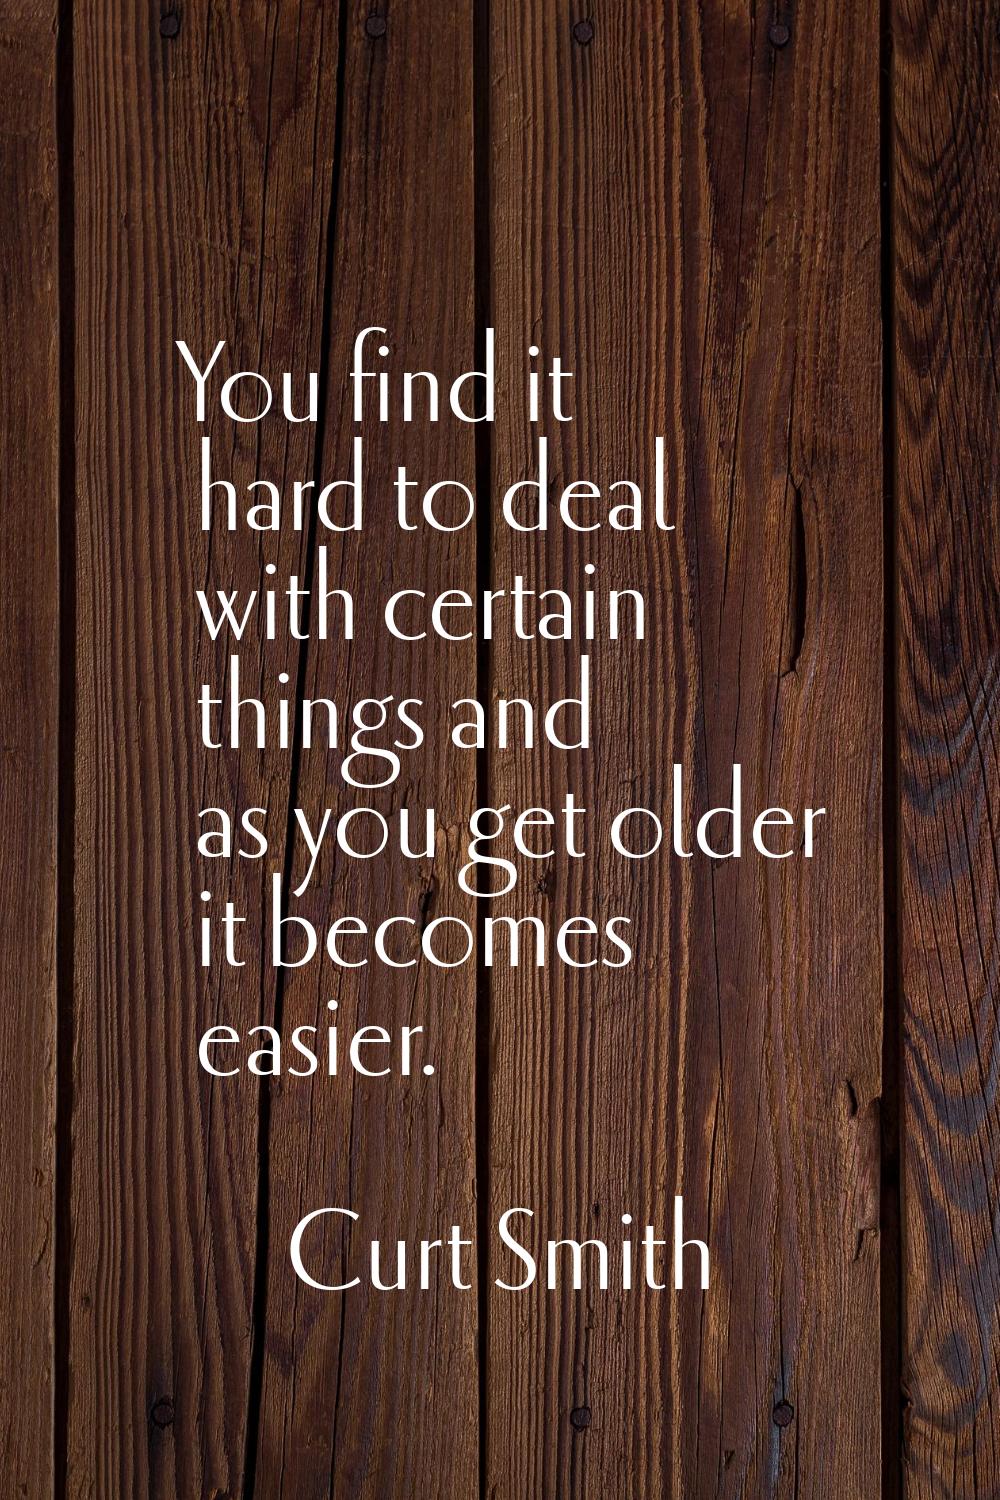 You find it hard to deal with certain things and as you get older it becomes easier.